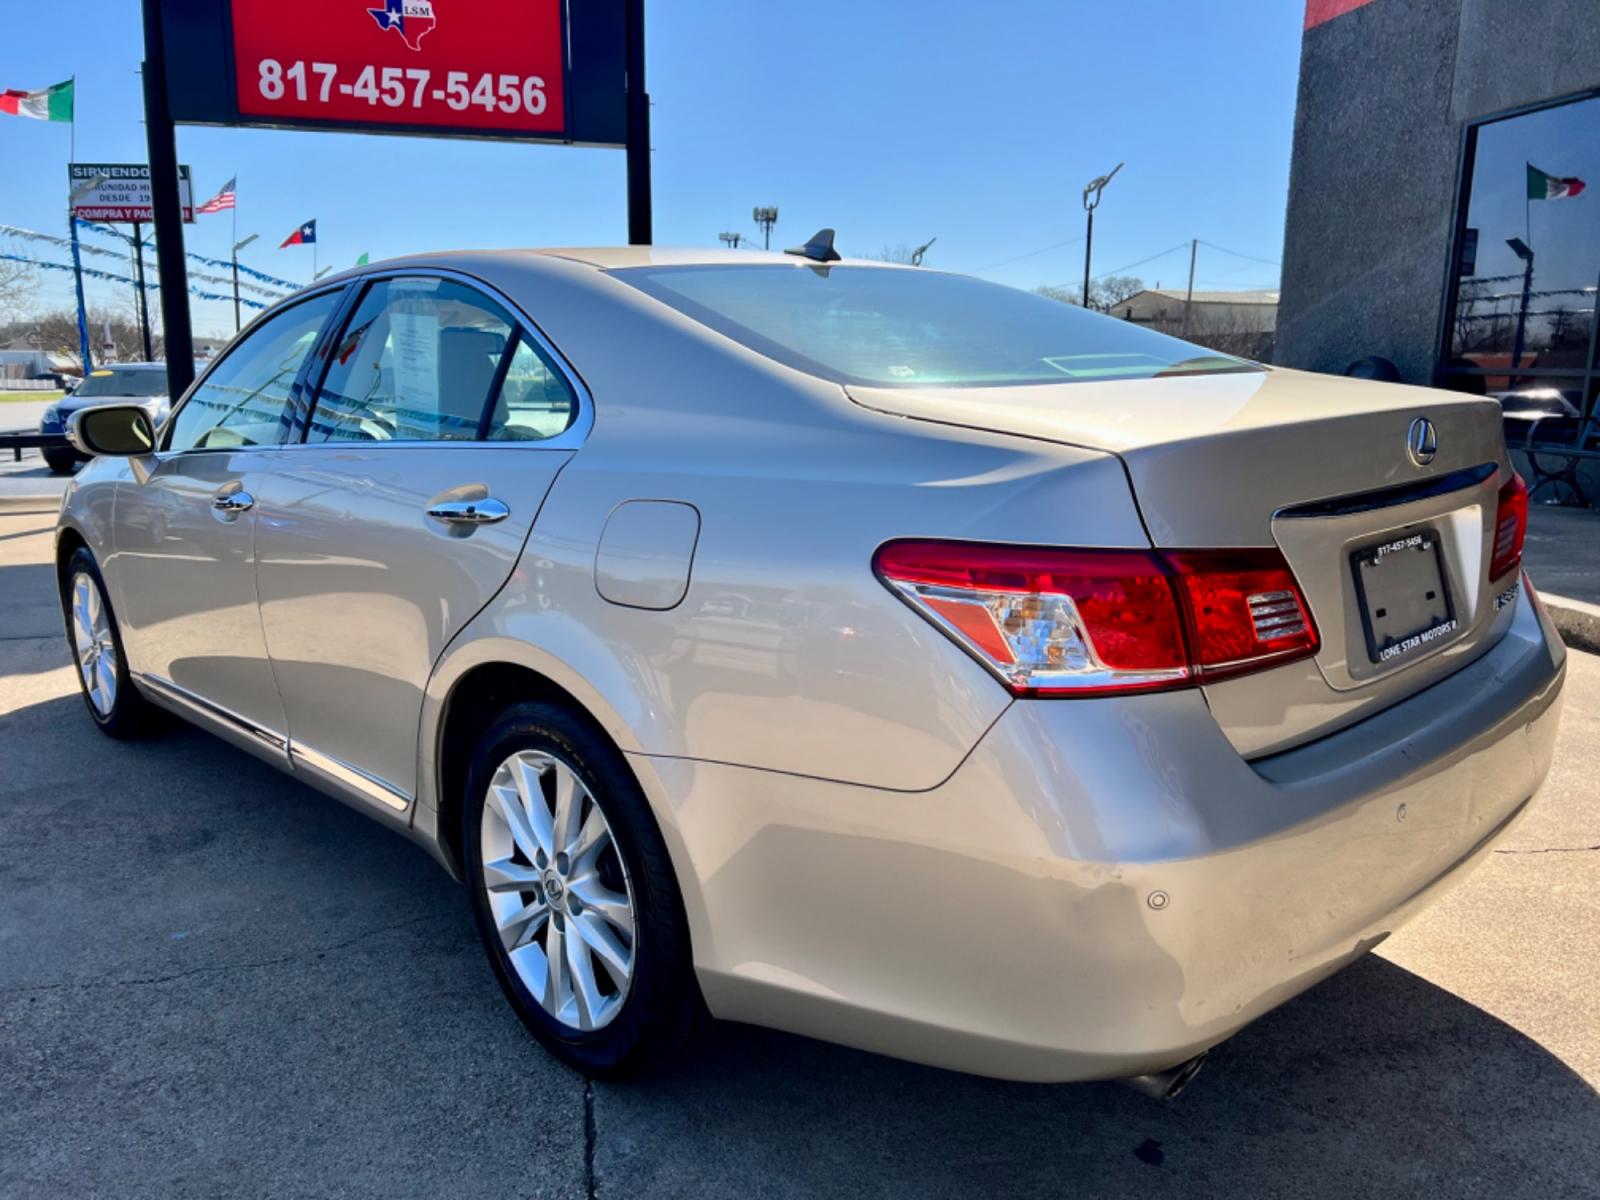 2011 GOLD LEXUS ES 350 (JTHBK1EG9B2) , located at 5900 E. Lancaster Ave., Fort Worth, TX, 76112, (817) 457-5456, 0.000000, 0.000000 - This is a 1 OWNER, 2011 LEXUS ES 350 4 DOOR SEDAN that is in excellent condition. There are no dents or scratches. The interior is clean with no rips or tears or stains. All power windows, door locks and seats. Ice cold AC for those hot Texas summer days. It is equipped with a CD player, AM/FM radio - Photo #3